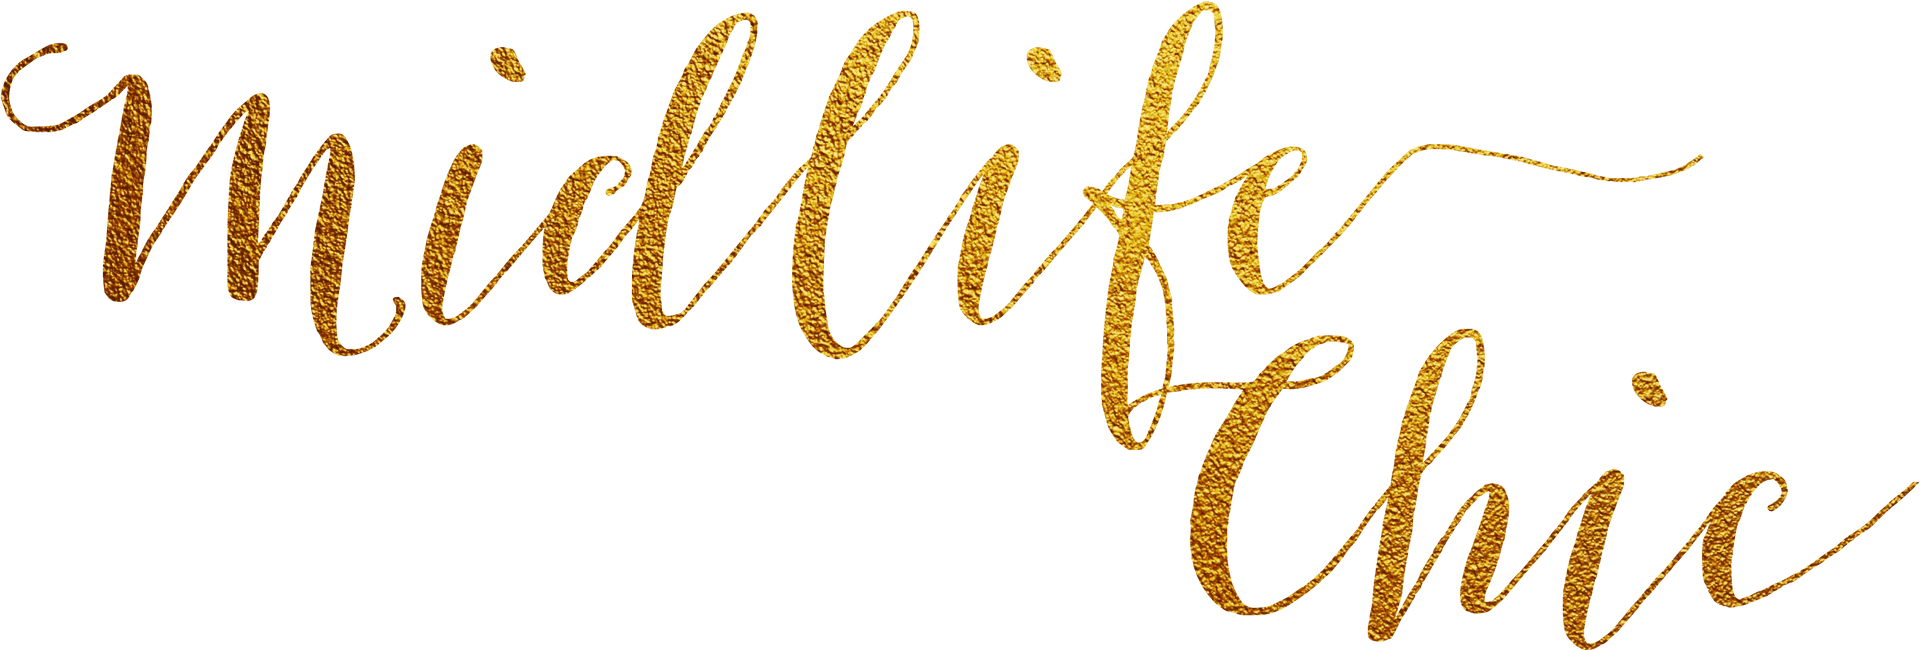 Midlife Chic_ Golden Text_ Design PNG image